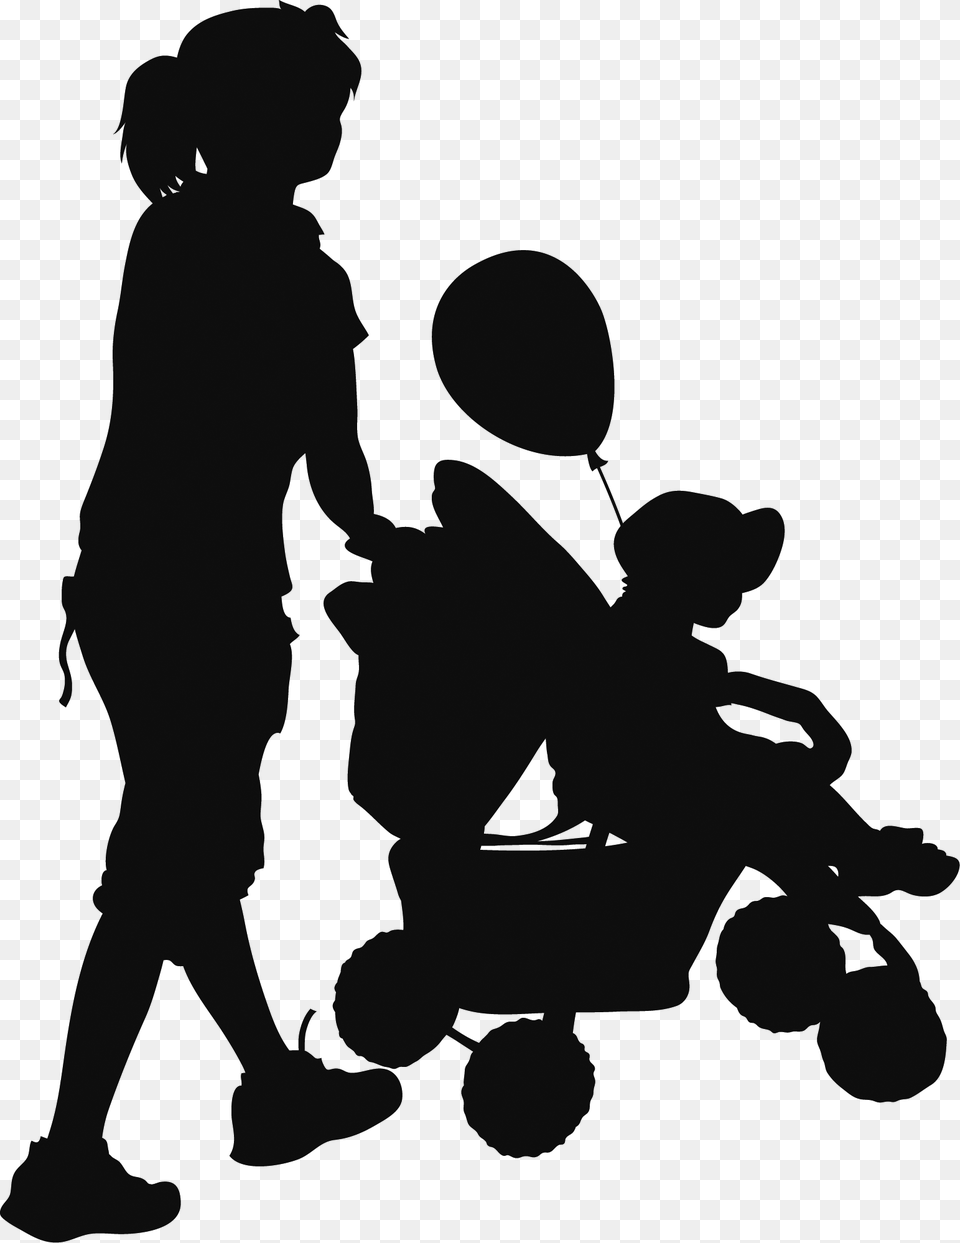 People Silhouettes 15 Silhouettes Projects To Try Family People Silhouette, Gray Free Png Download